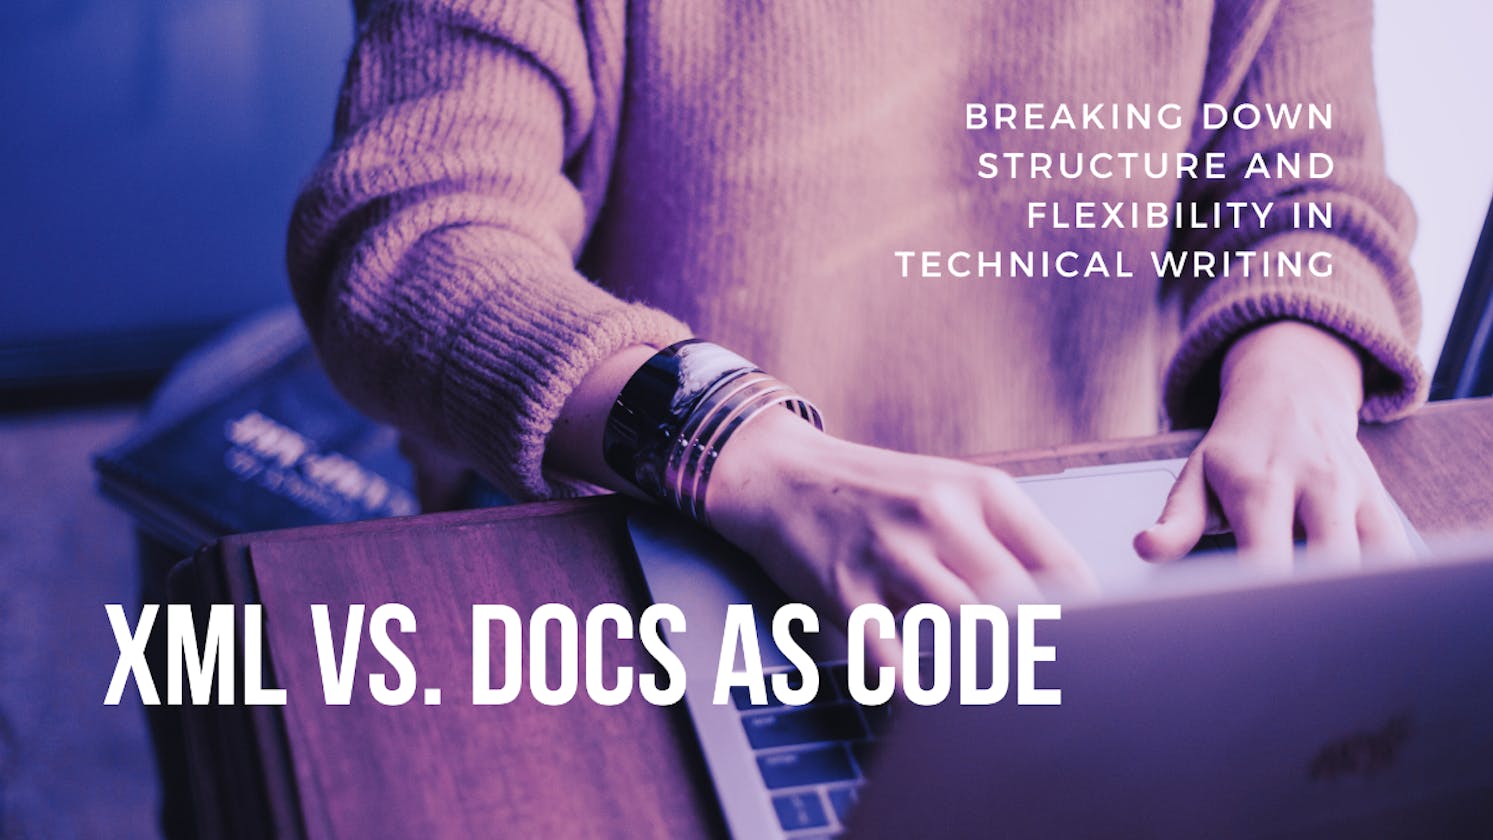 XML vs. Docs as Code: Breaking Down Structure and Flexibility in Technical Writing